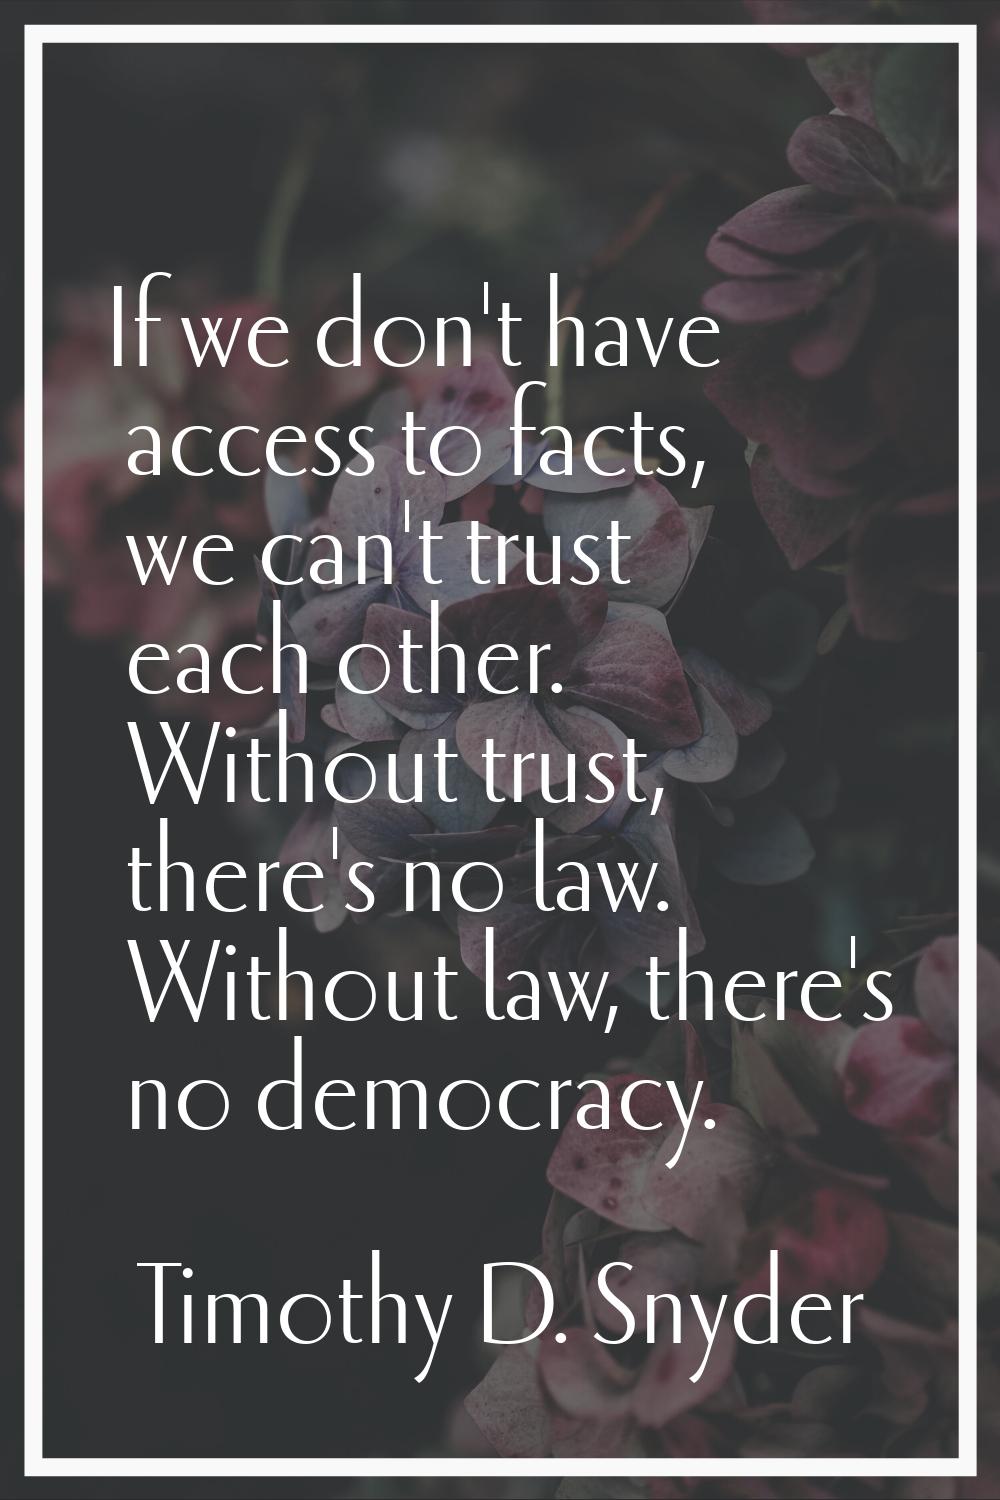 If we don't have access to facts, we can't trust each other. Without trust, there's no law. Without